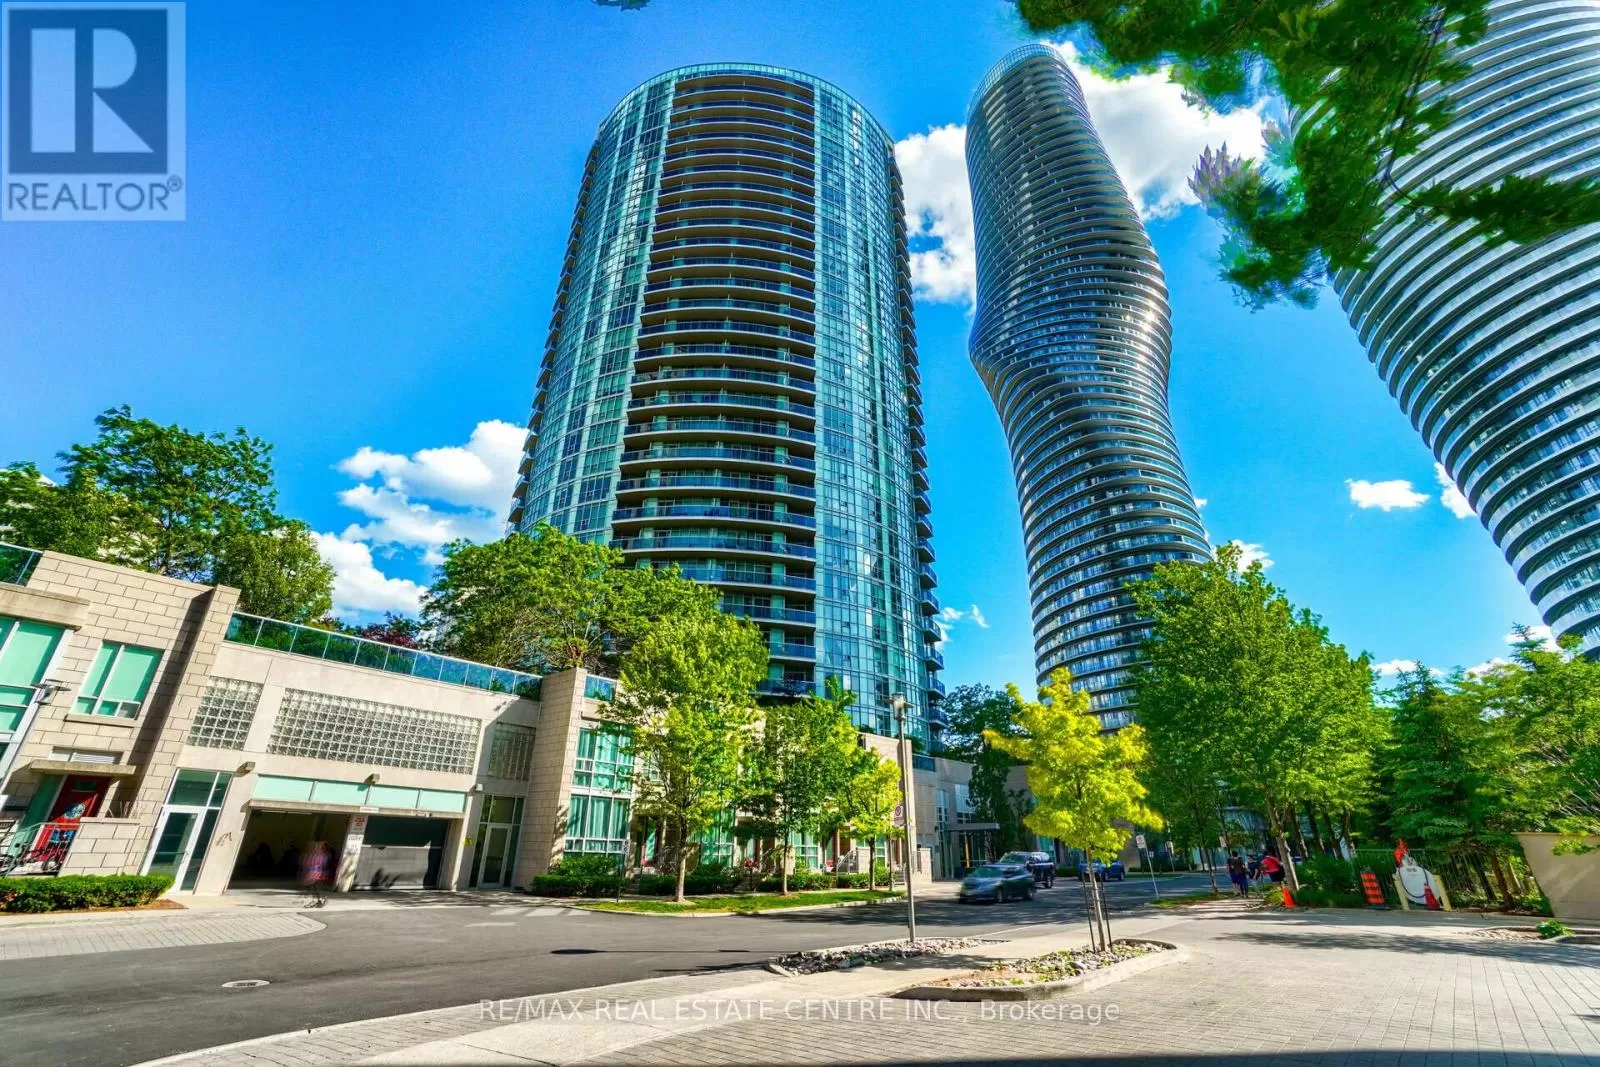 Apartment for rent: #1004 -70 Absolute Ave, Mississauga, Ontario L4Z 0A4